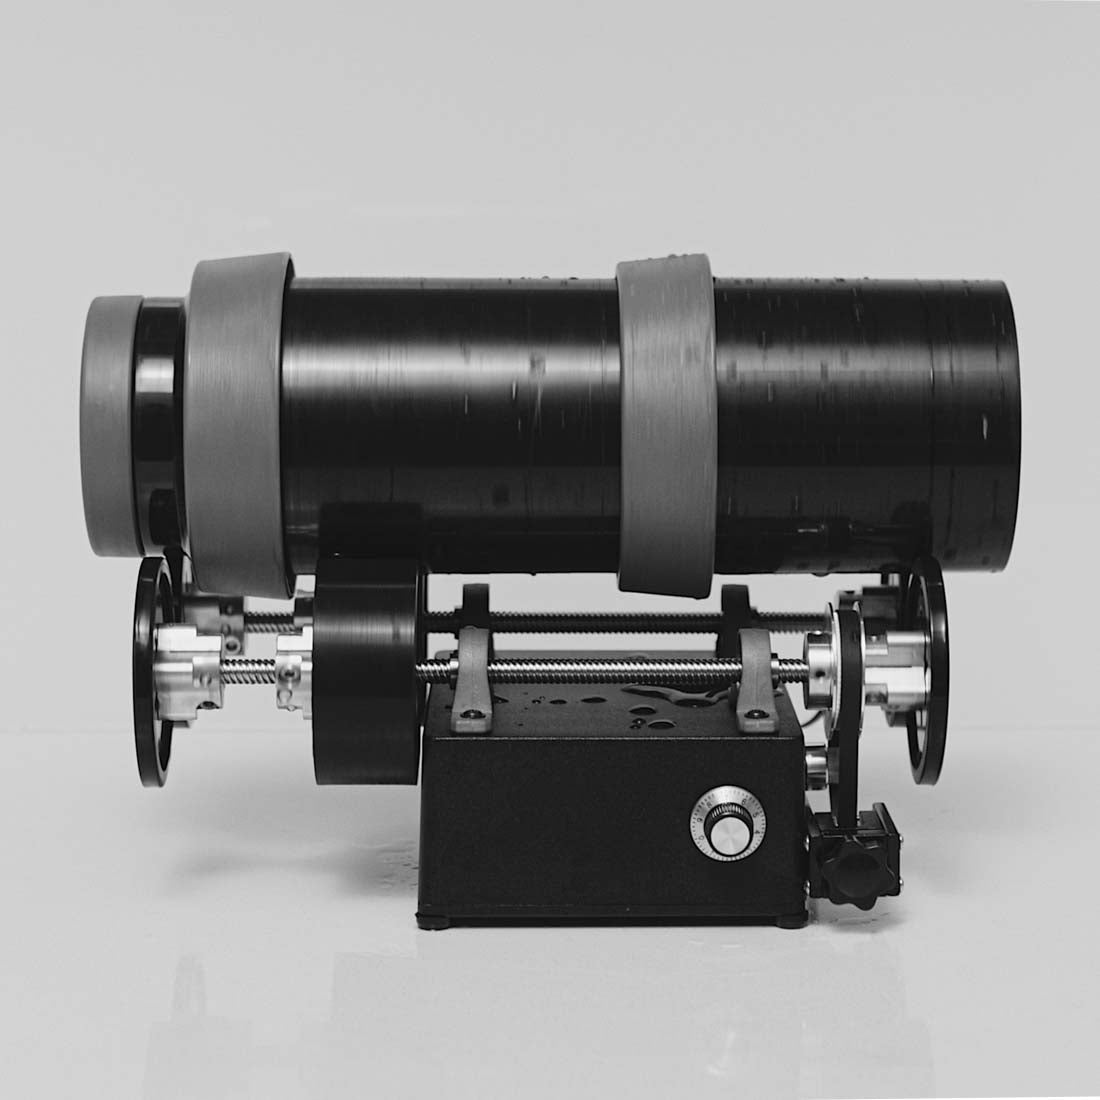 AXLE Photography Supplies CR1 Compact Rotary Processor Automatic Rotational Constant Agitation 35mm 120 4x5 C41 E6 Film Negative Rotation Developer for JOBO and Paterson Tanks Compatible with Ilford Kodak Stocks